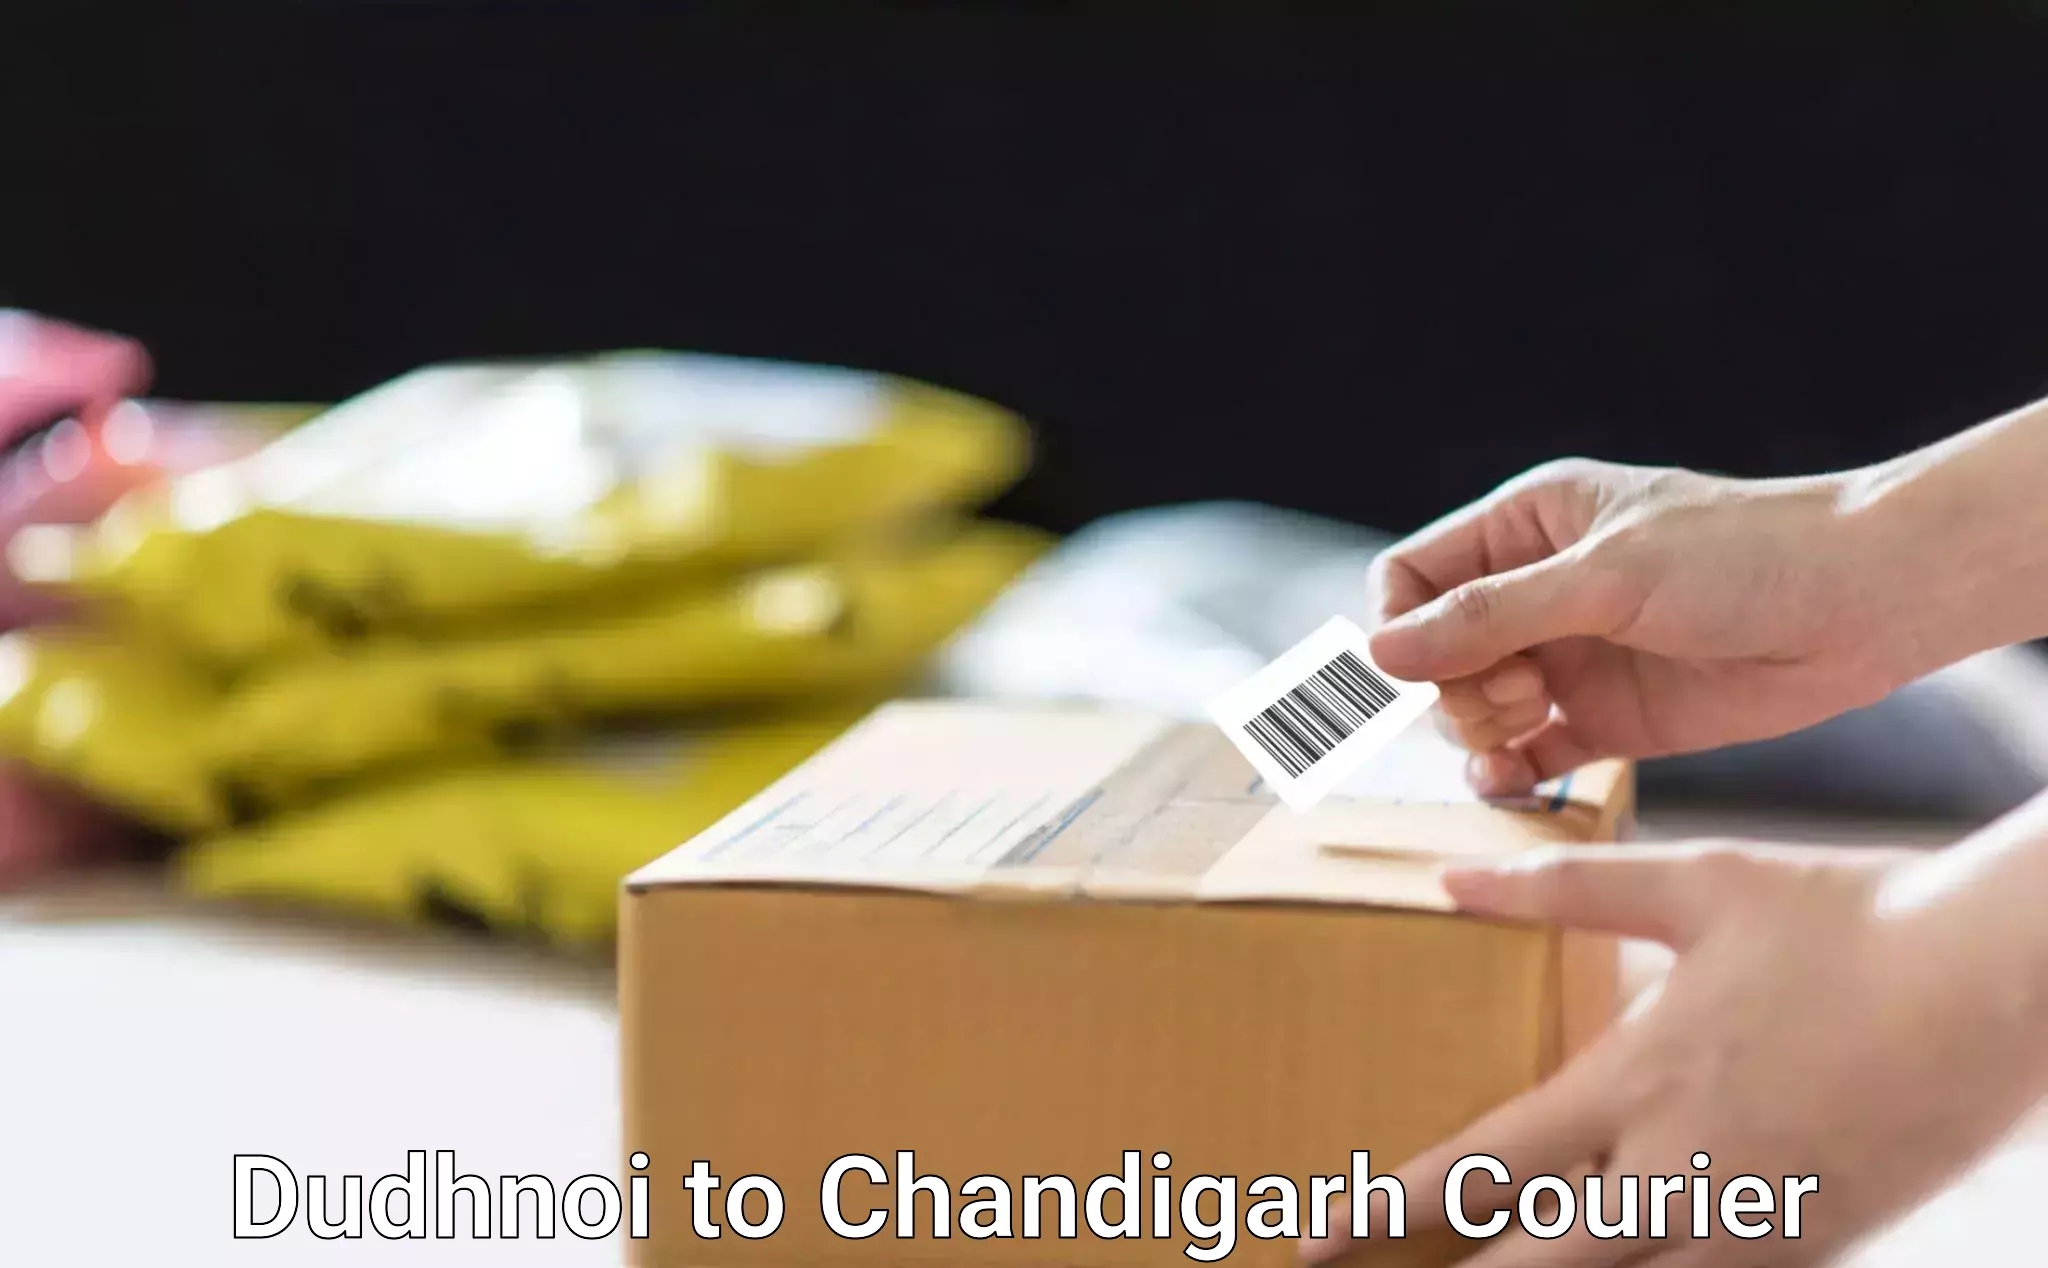 Cash on delivery service Dudhnoi to Chandigarh